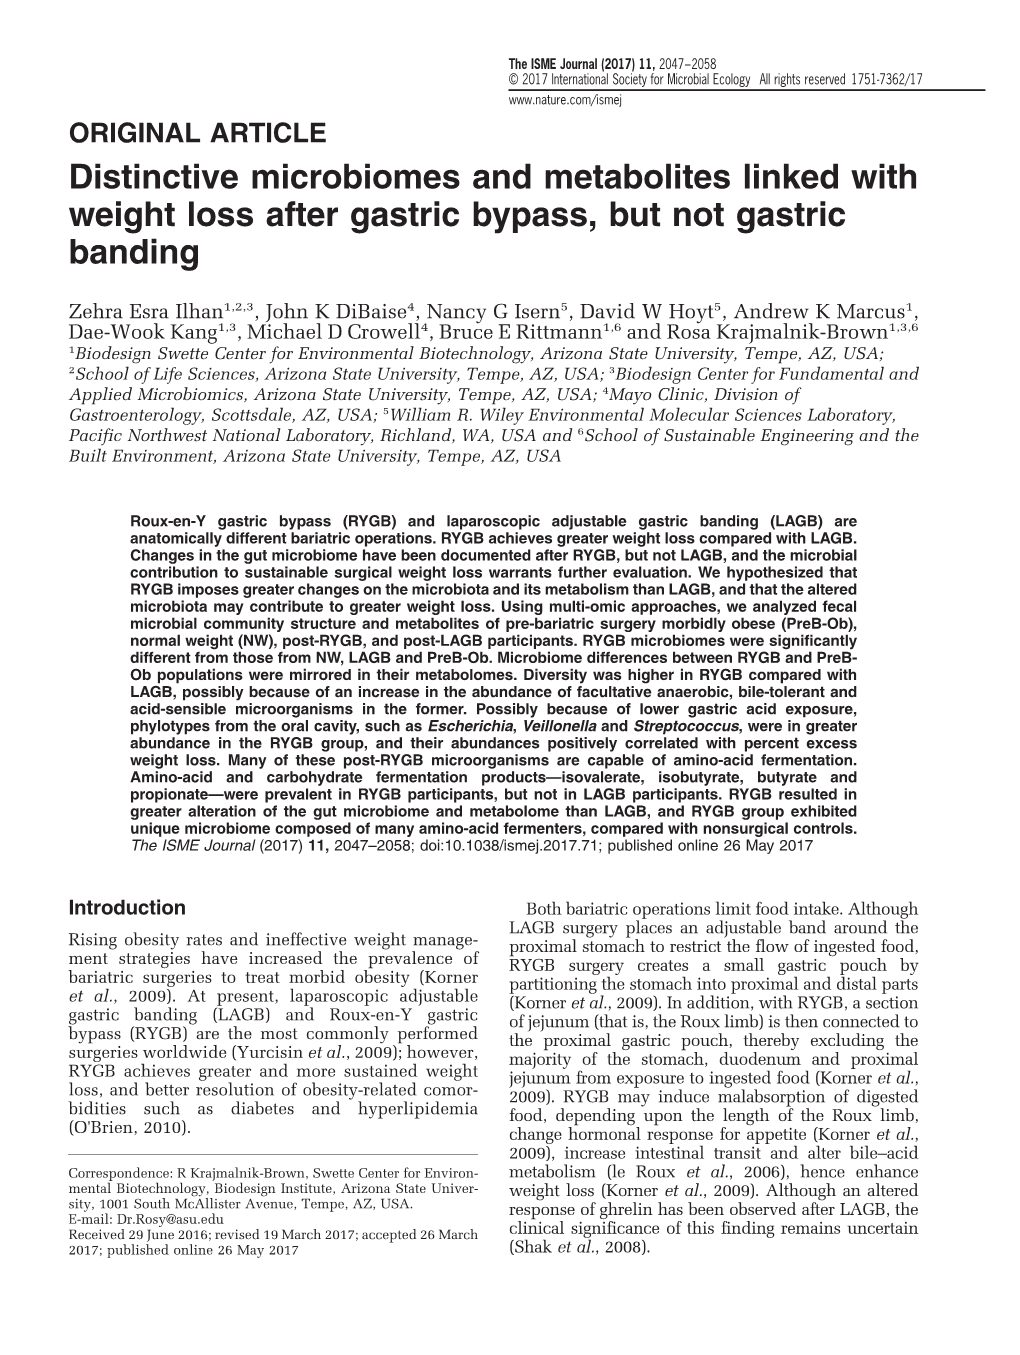 Distinctive Microbiomes and Metabolites Linked with Weight Loss After Gastric Bypass, but Not Gastric Banding